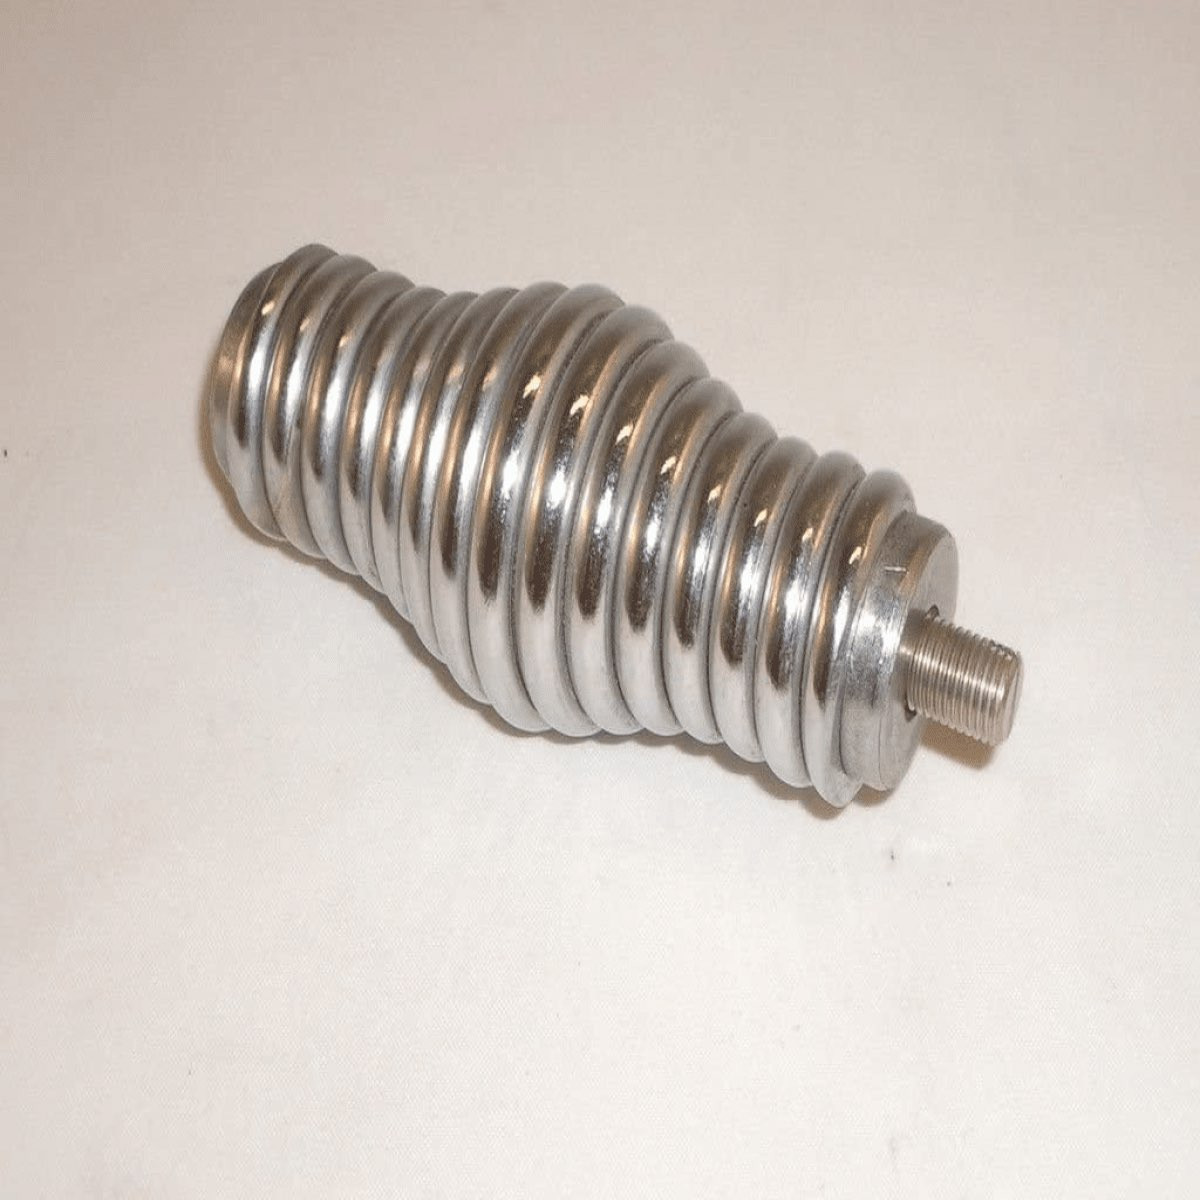 Picture of Workman KA52 Heavy Duty Pot Belly Spring